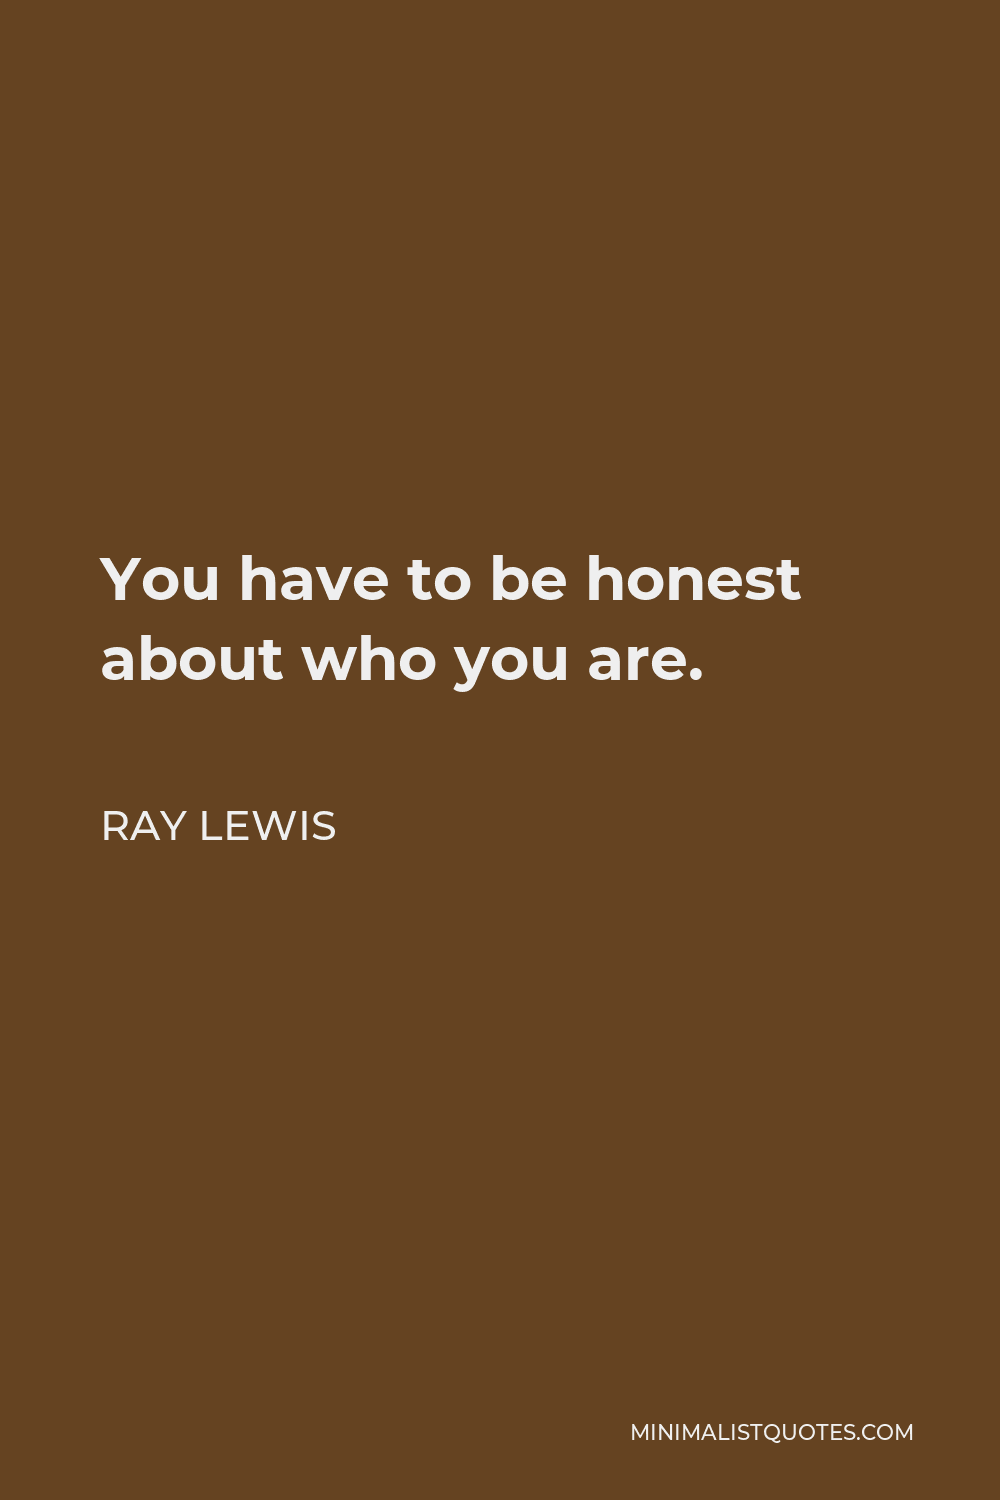 Ray Lewis Quote - You have to be honest about who you are.